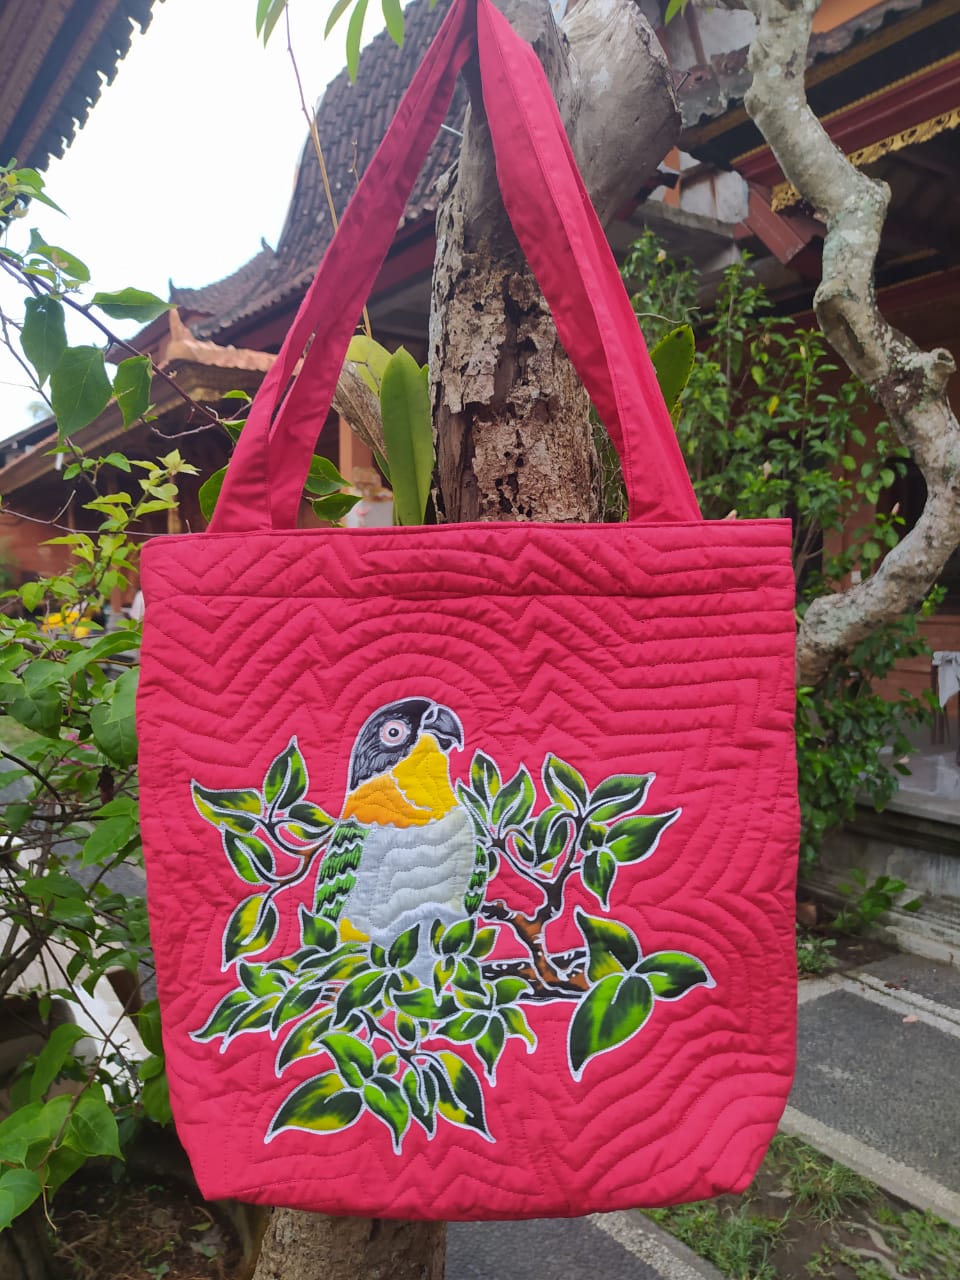 A lovely hand-painted batik tote-style bag with a curious Black-headed Caique set amongst tropical foliage.